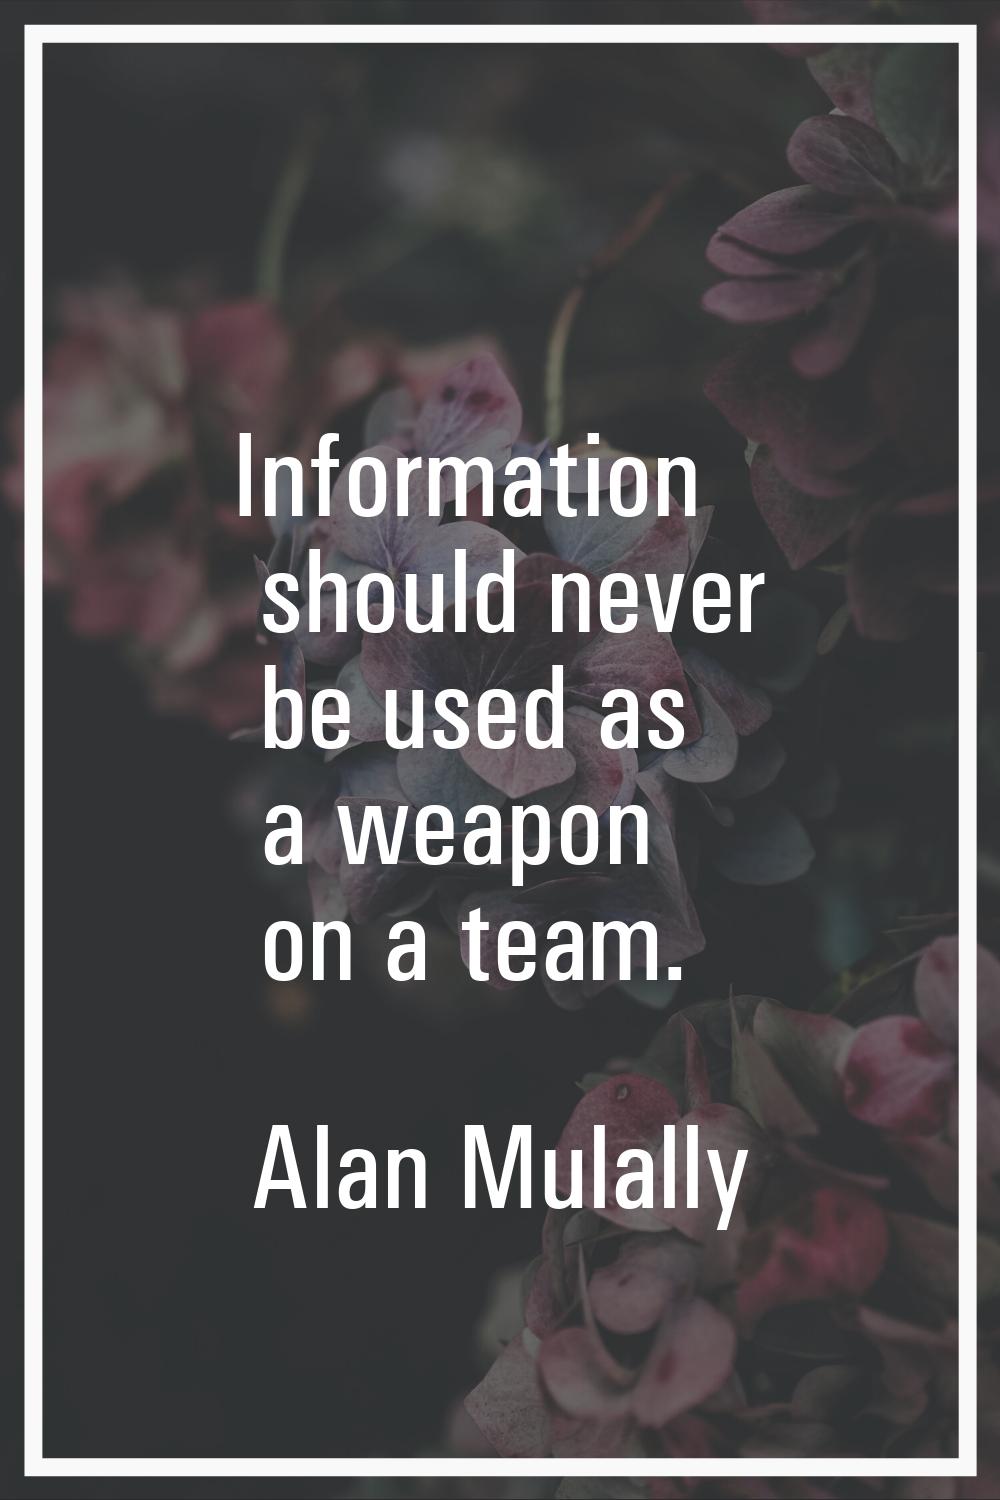 Information should never be used as a weapon on a team.